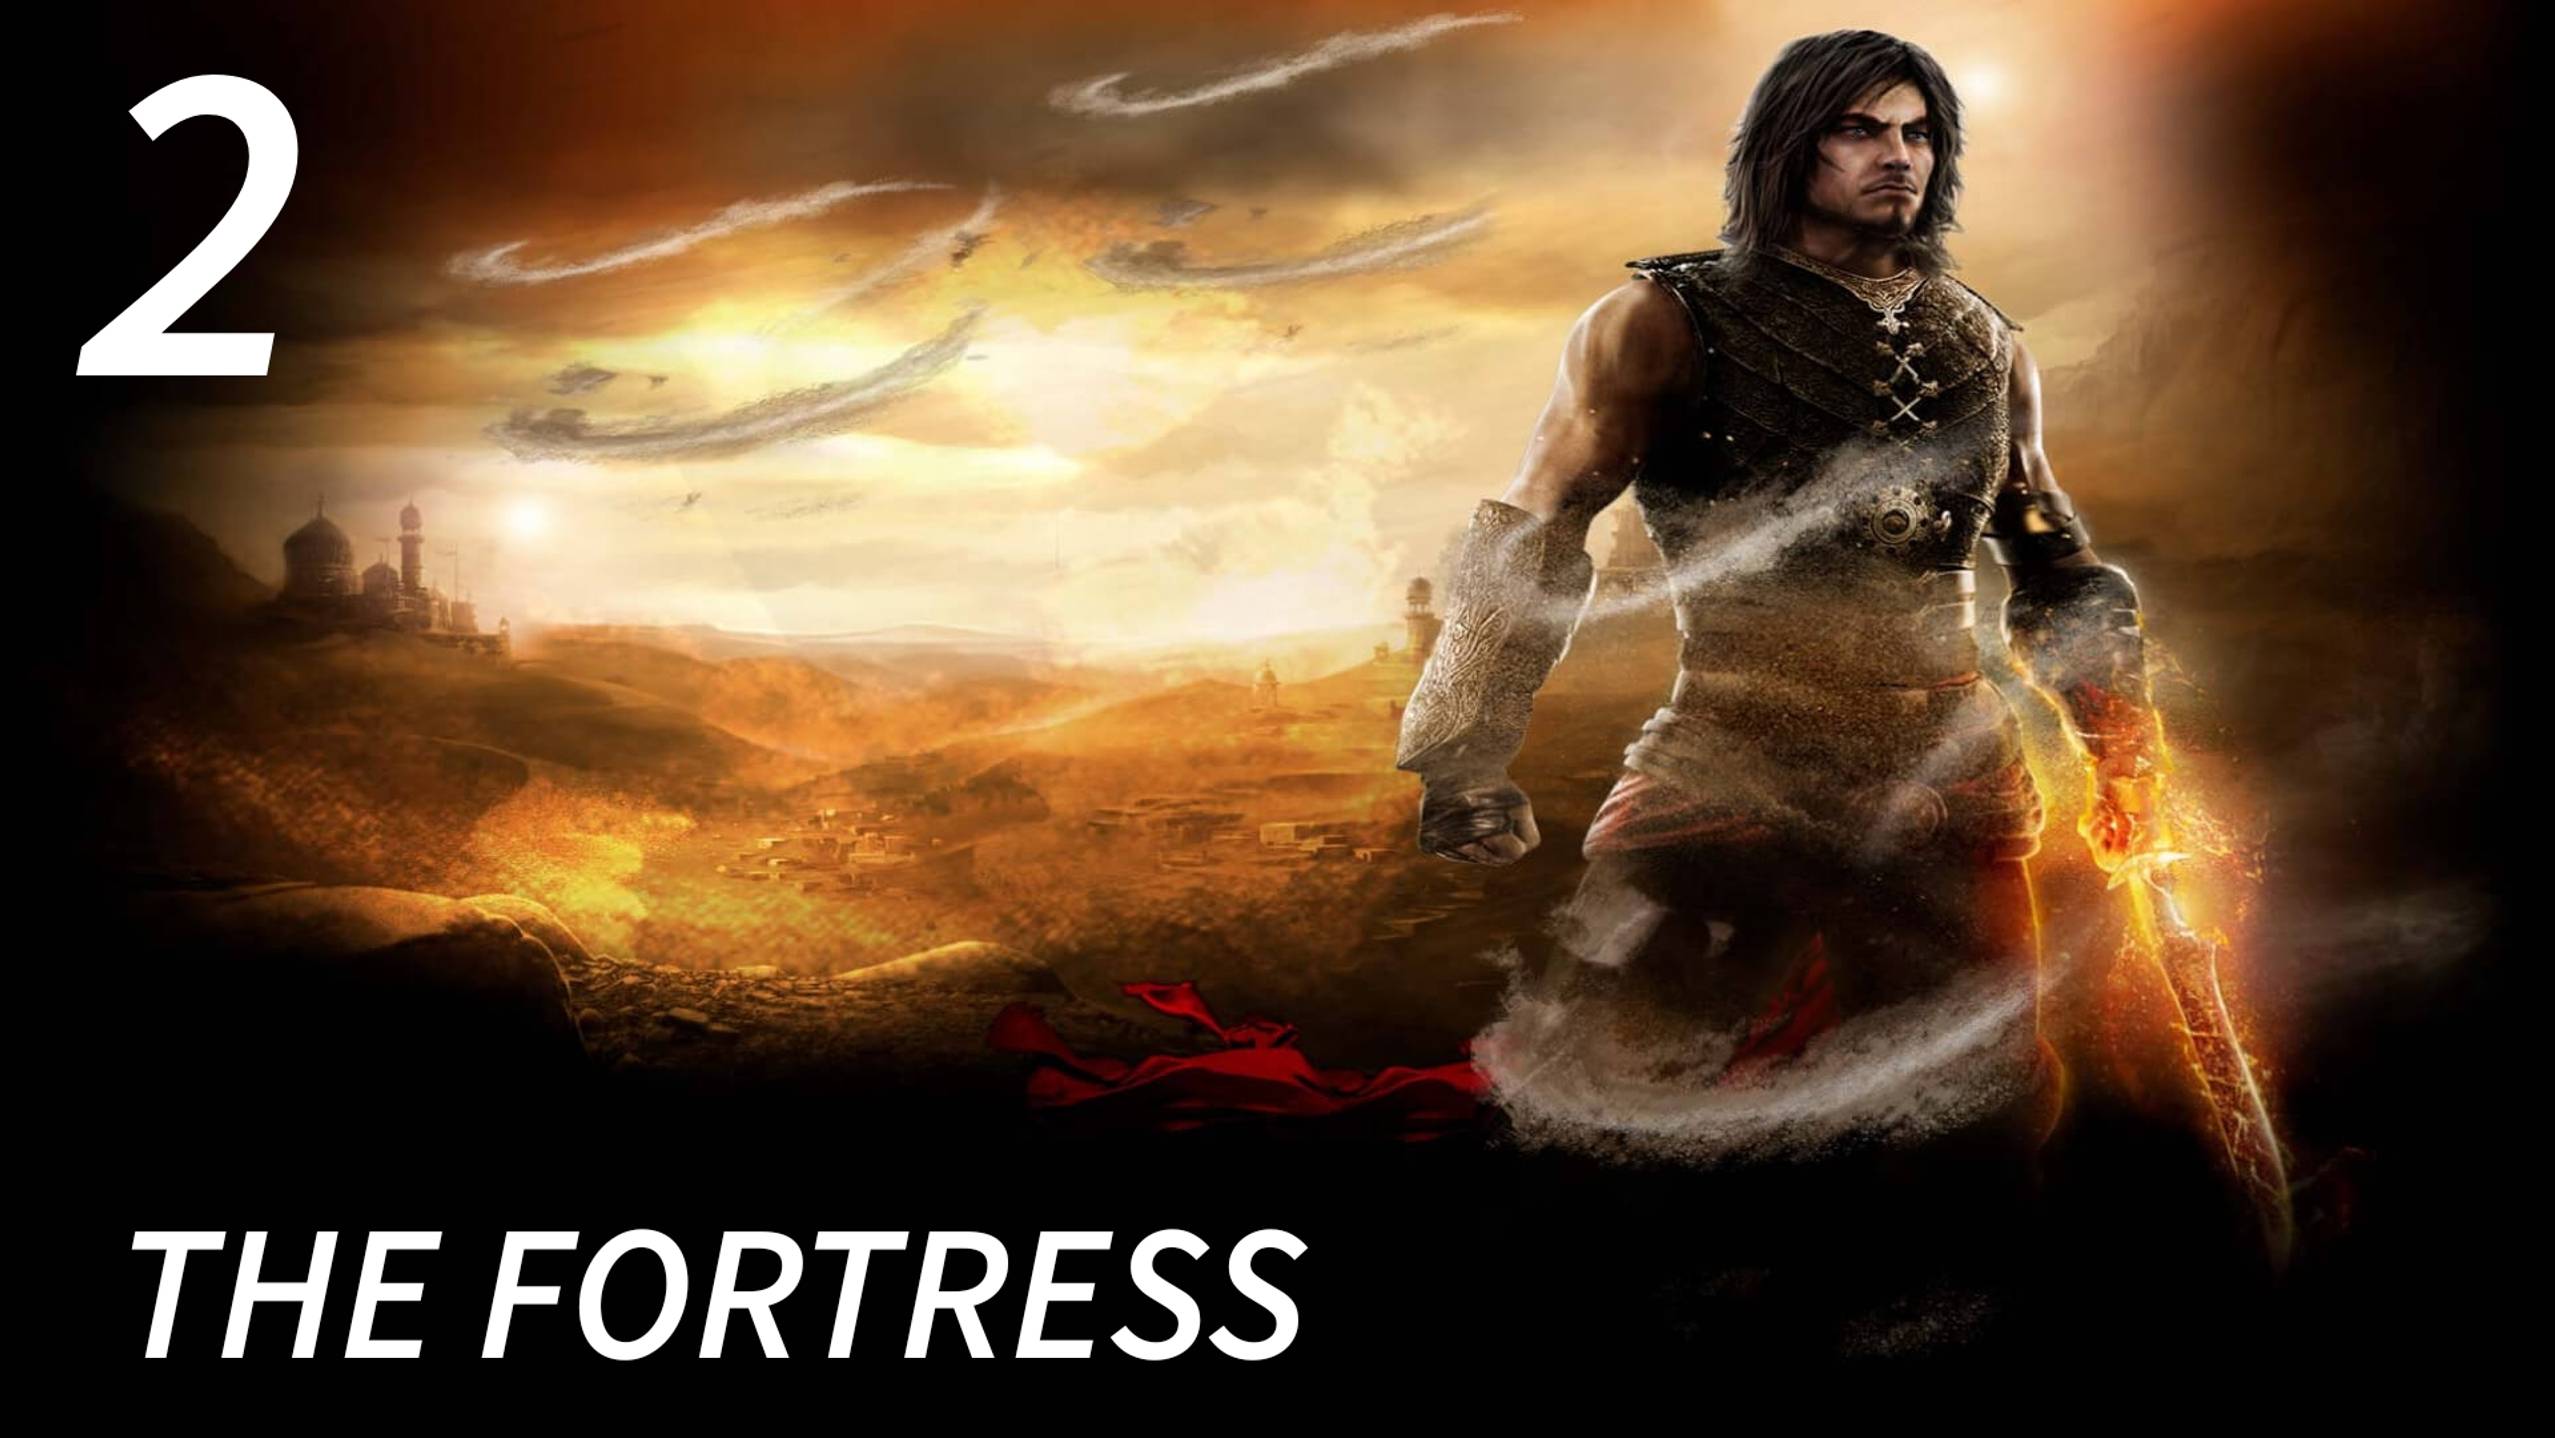 Prince Of Persia: The Forgotten Sands / The Fortress